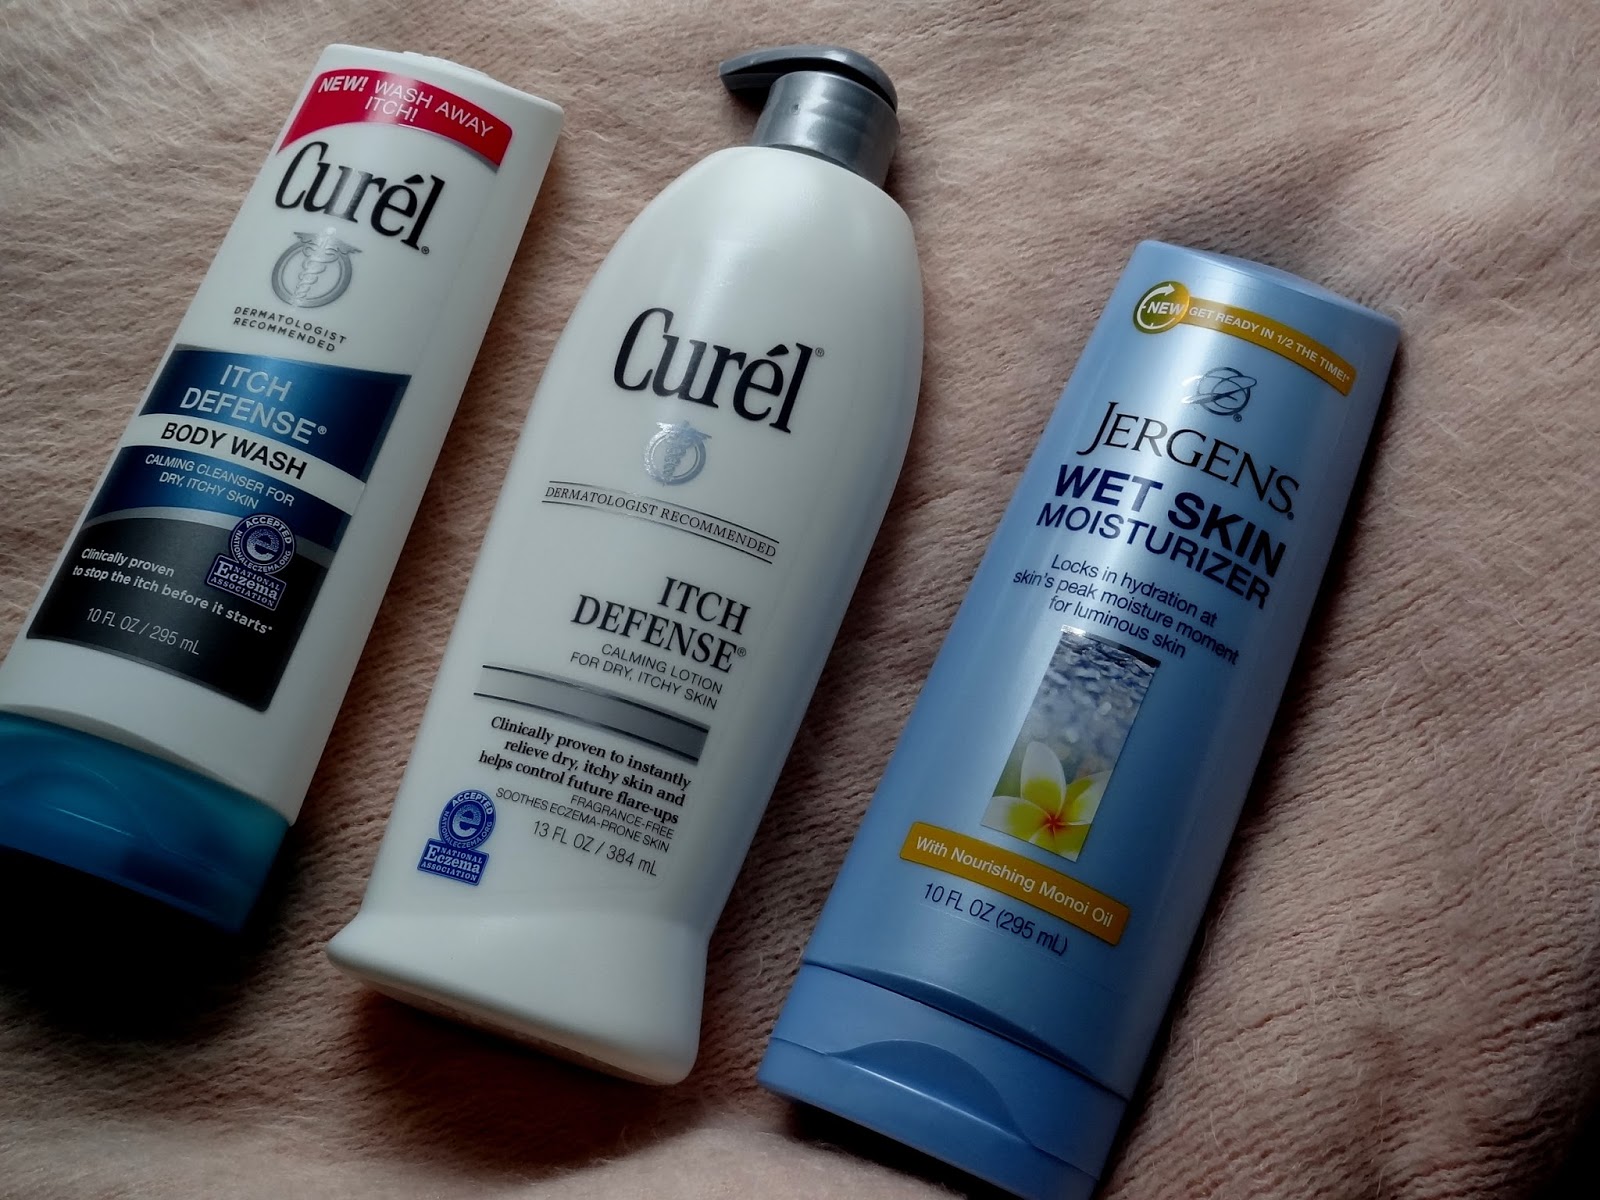 3. Curel Itch Defense Lotion for Tattoos - wide 6